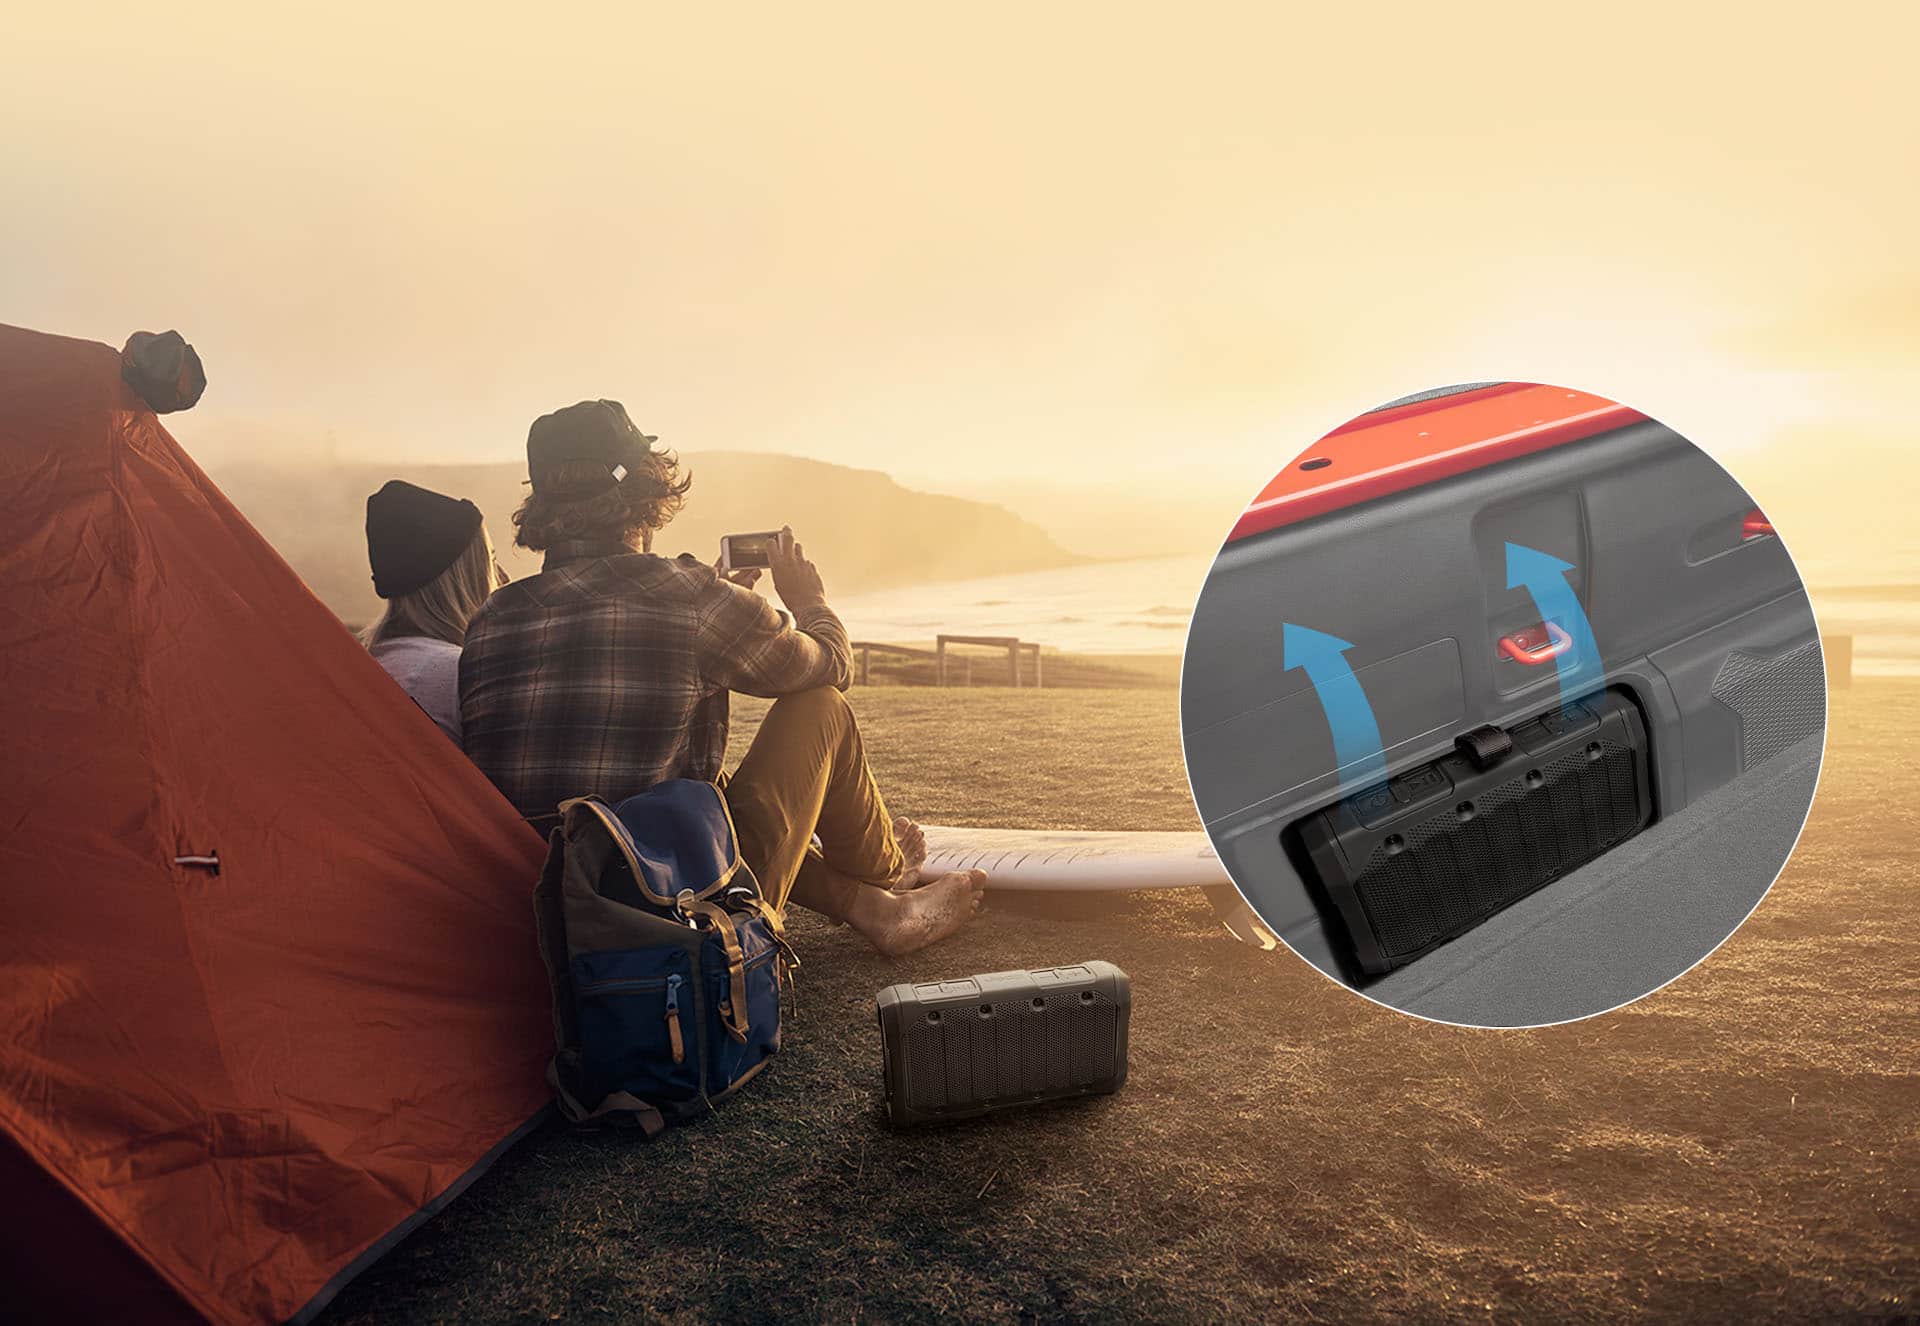 A couple on the beach with a wireless connectivity speaker beside them, as well as an inset image showing where the speaker fits into the side of the 2022 Jeep Gladiator truck bed.